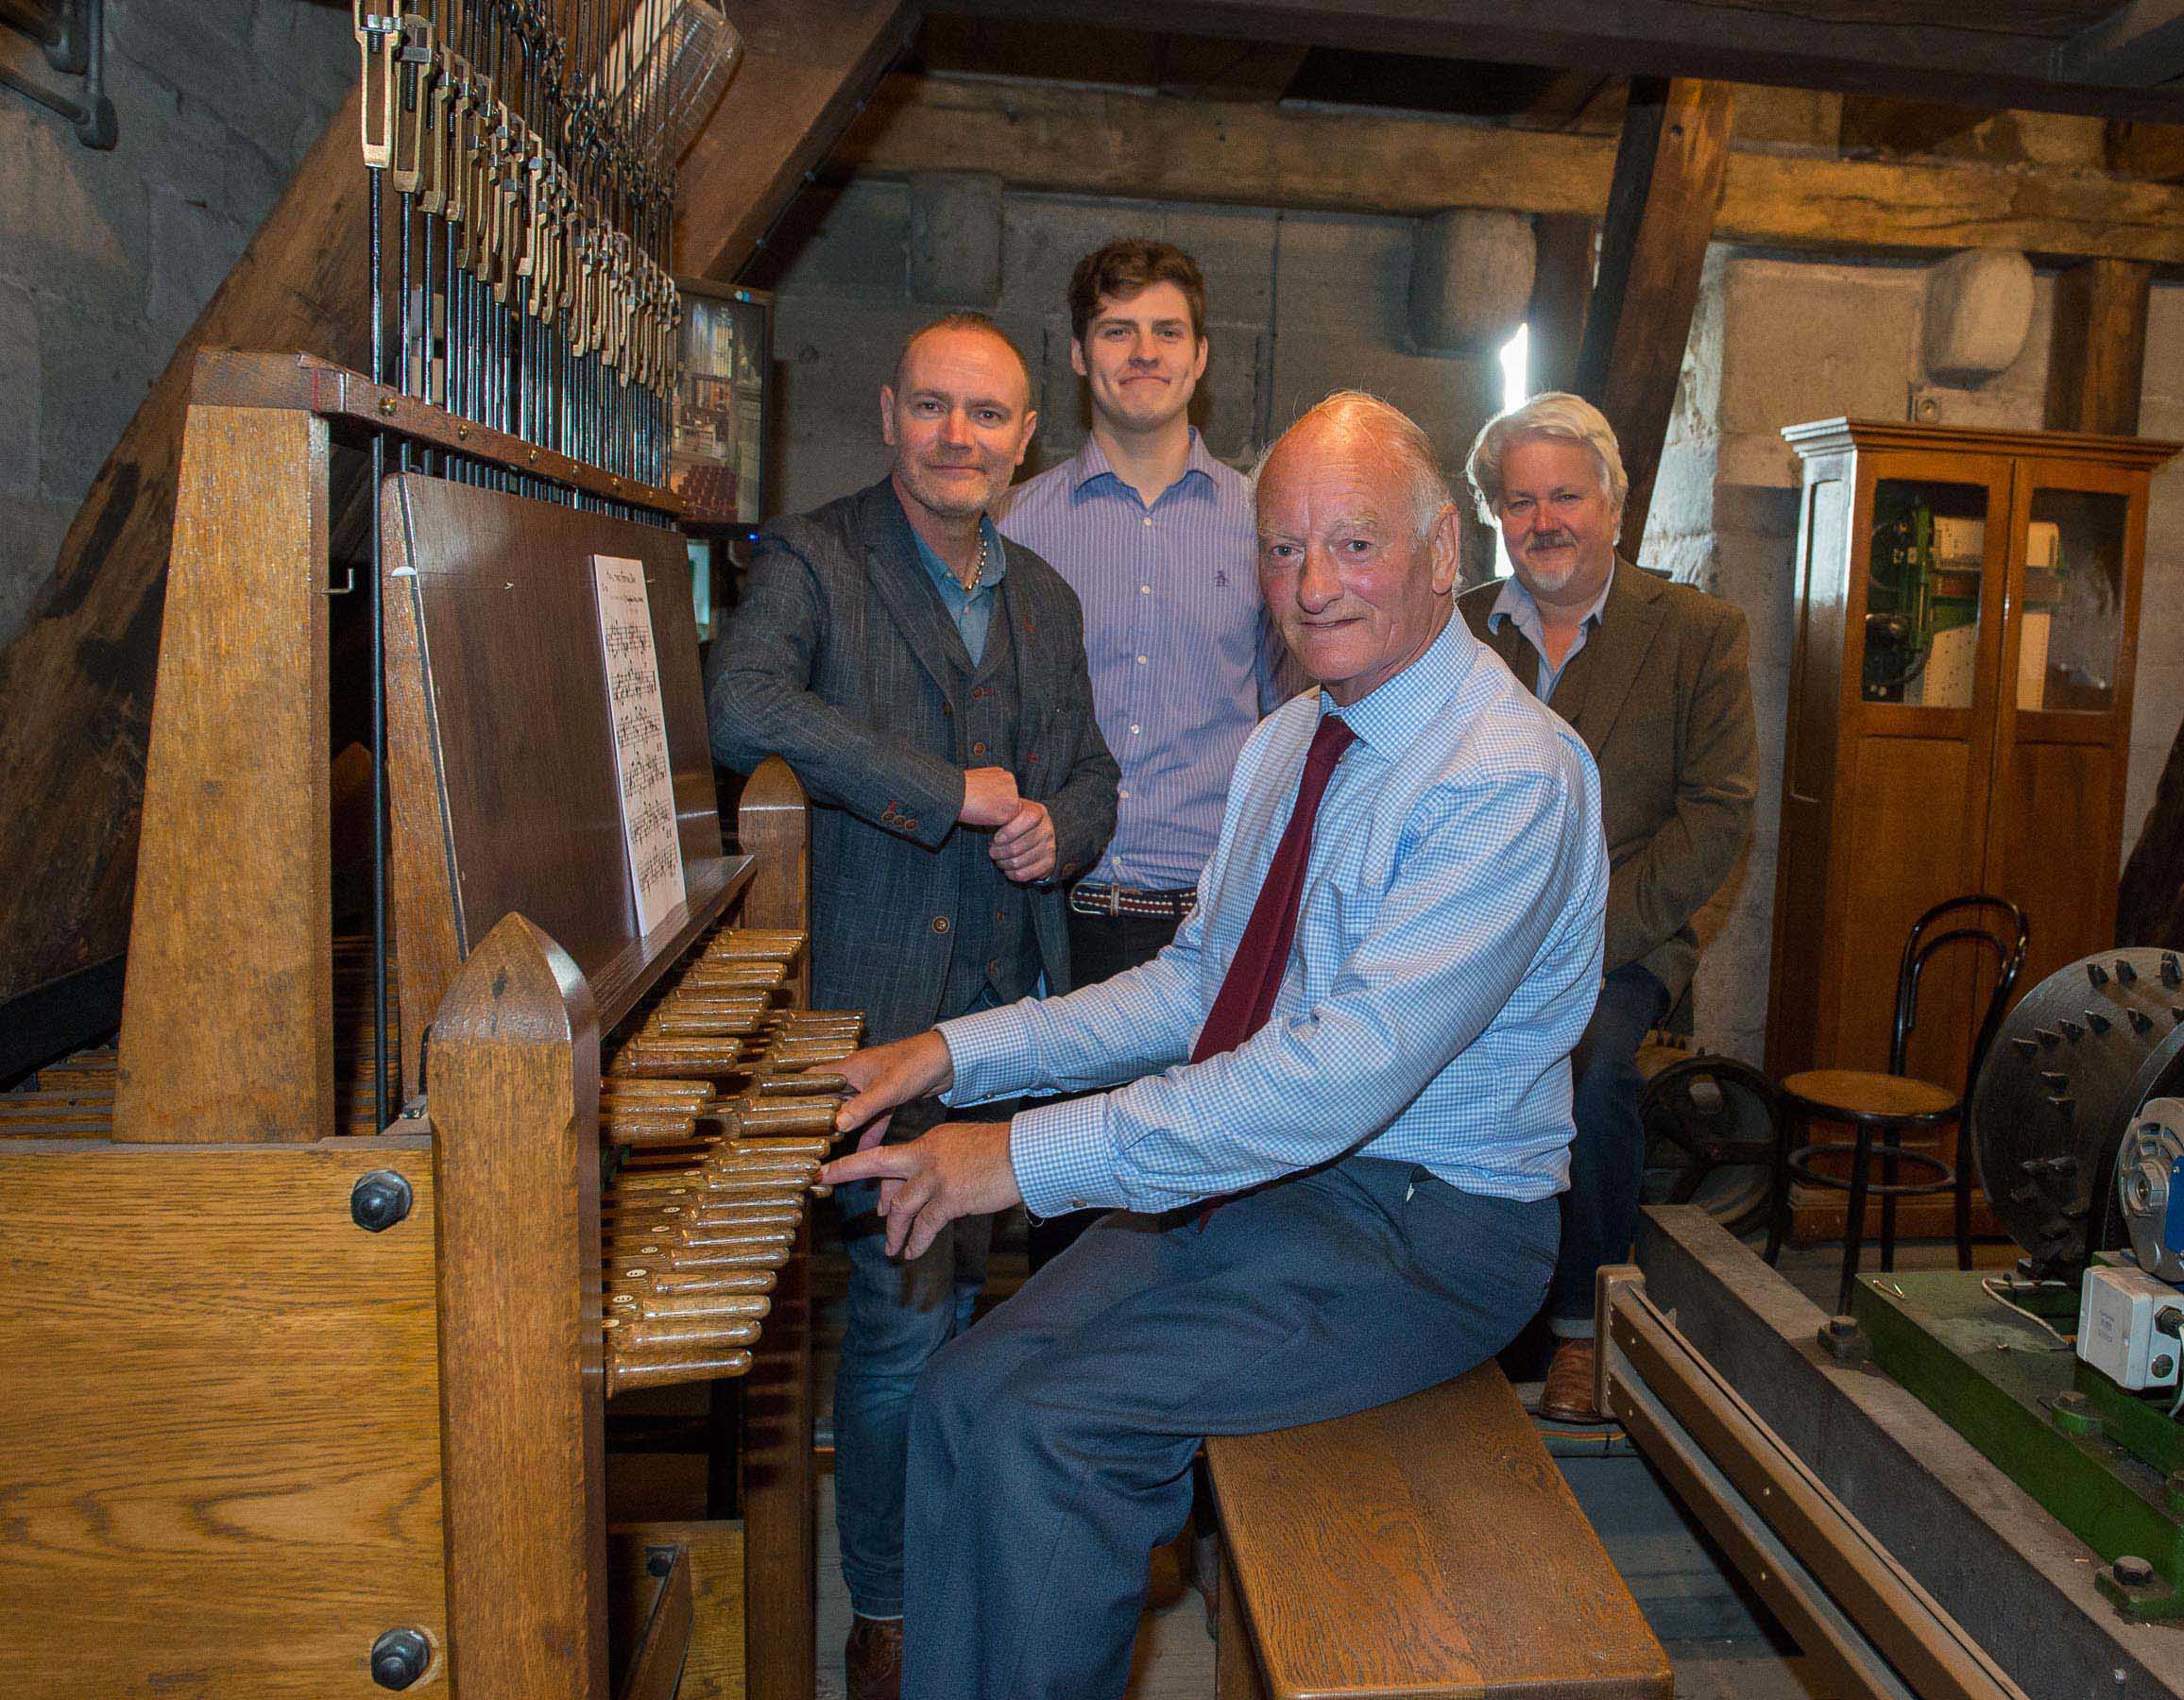 Students capture St John's Kirk bells after nearly fifty years